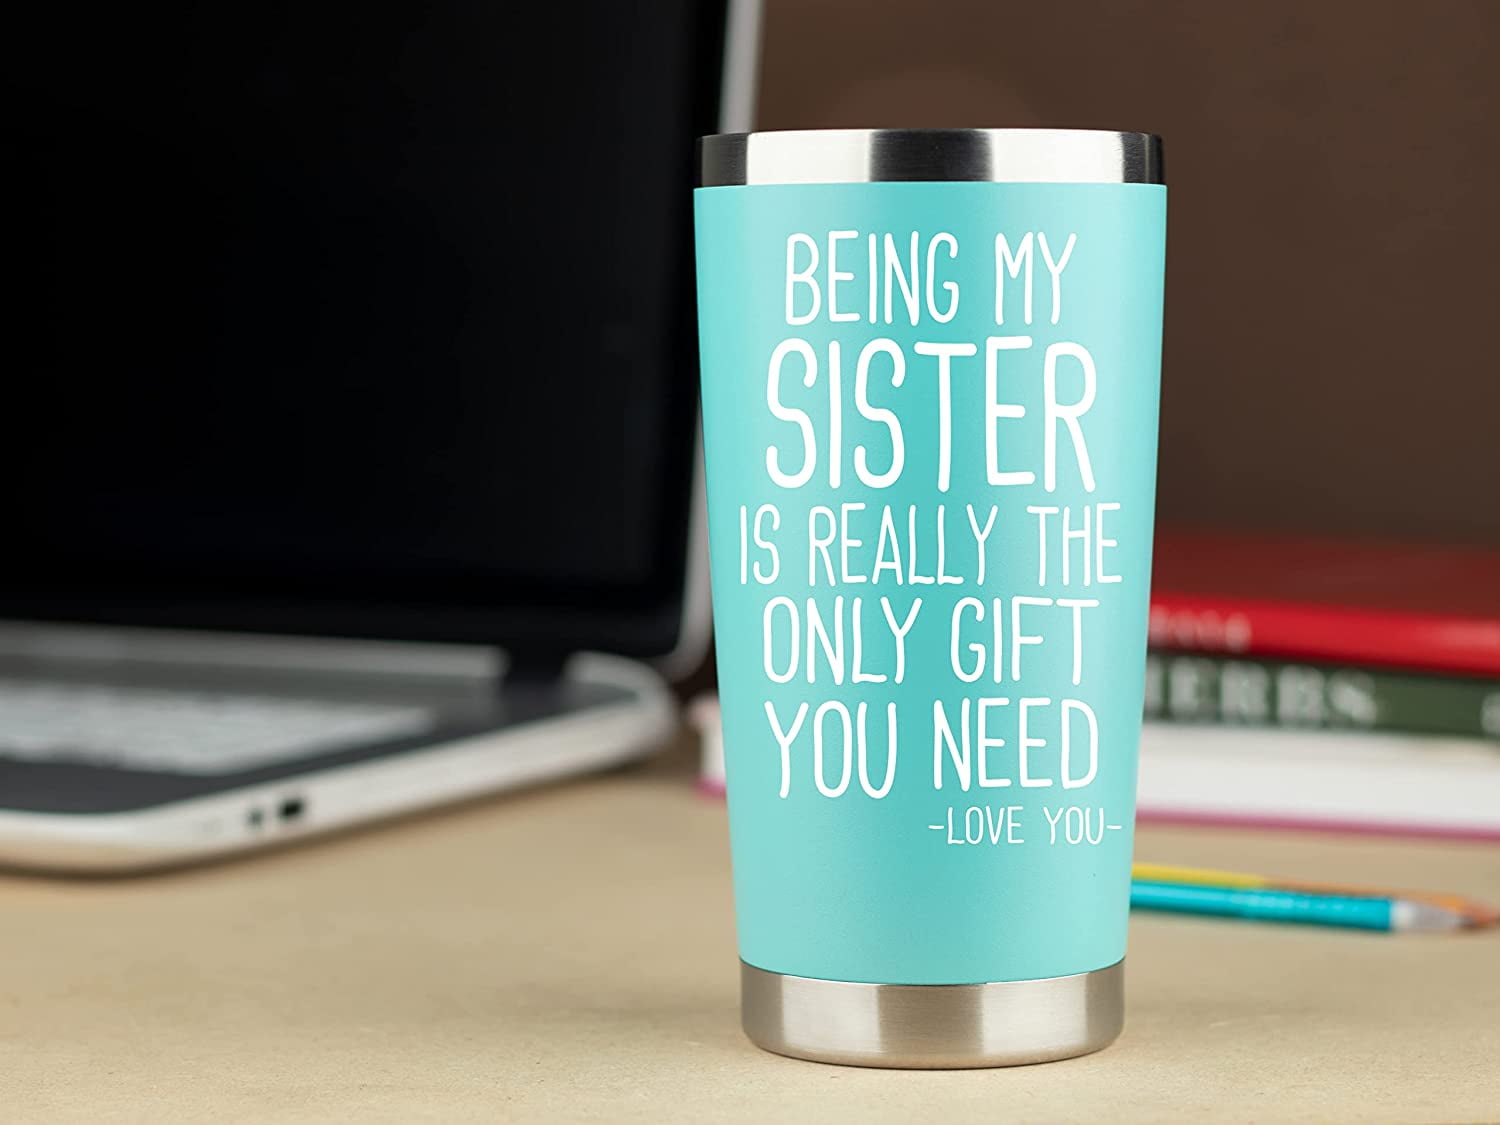 27 Super Trendy Birthday Gifts for Sister She'll Love! | Birthday gifts for  sister, Small birthday gifts, Best birthday gifts